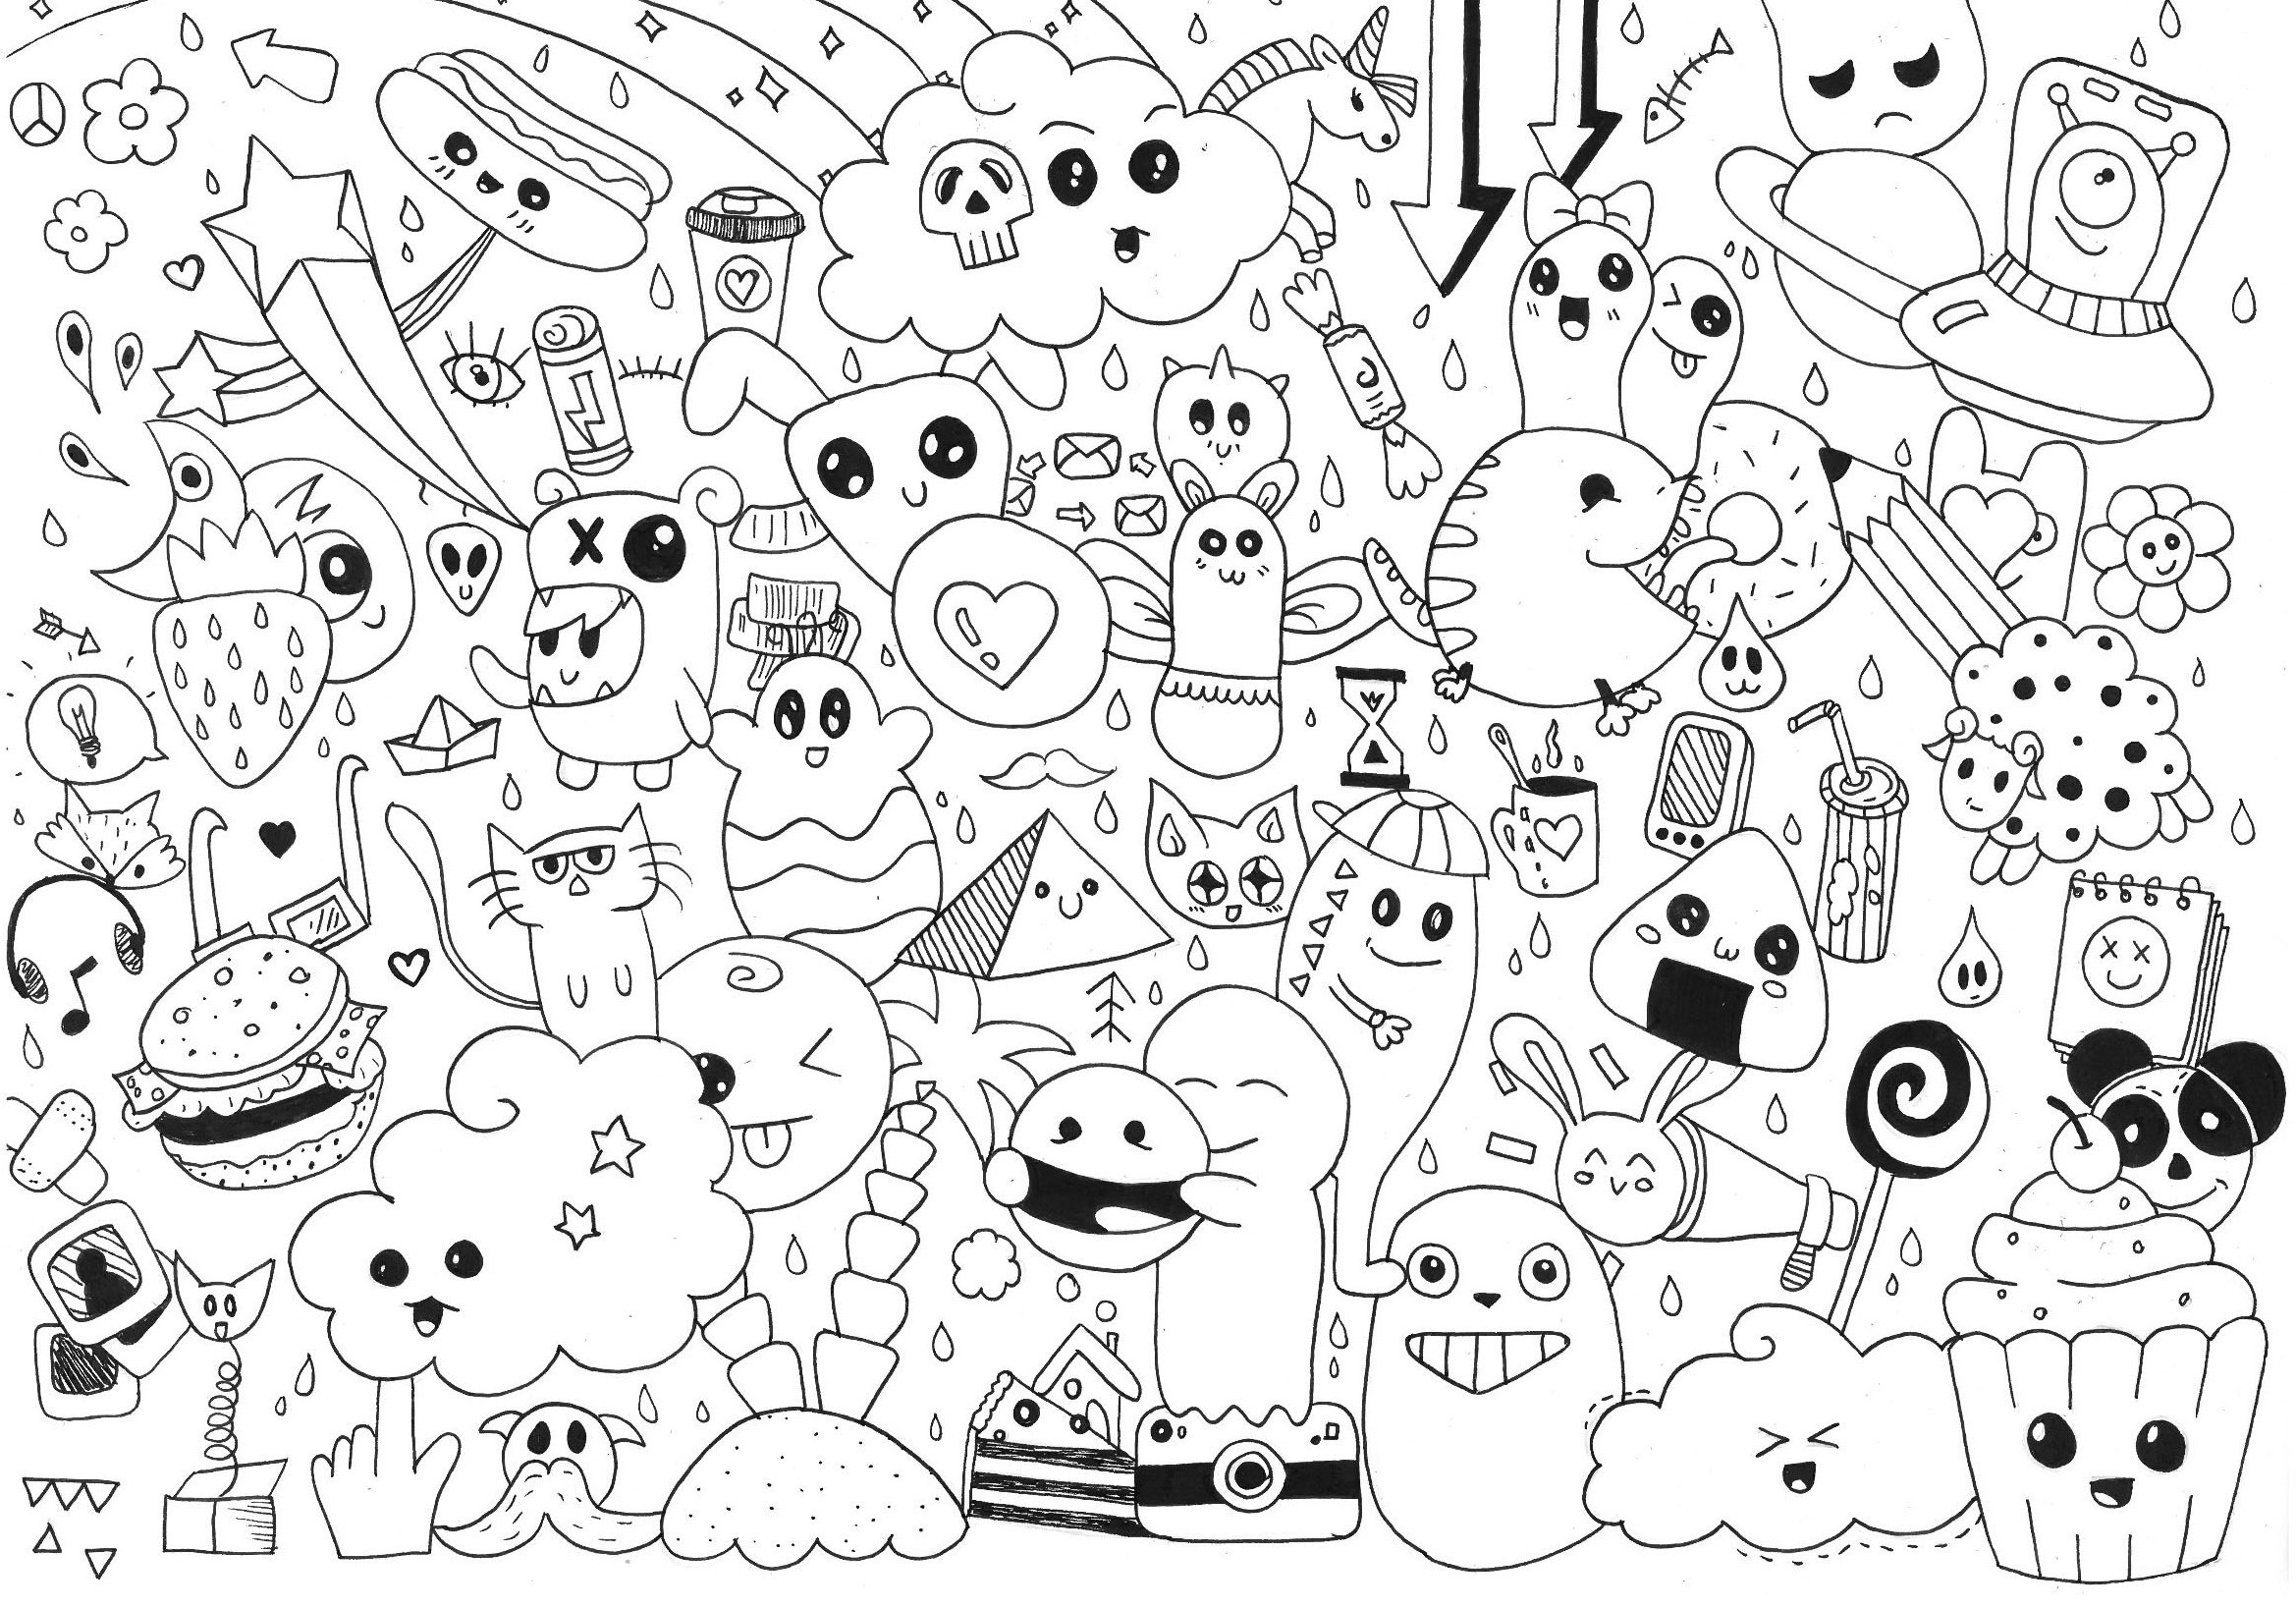 Coloring Ideas : Coloring Page Amazing Doodle Art Pages Gaming - Free Printable Doodle Art Coloring Pages